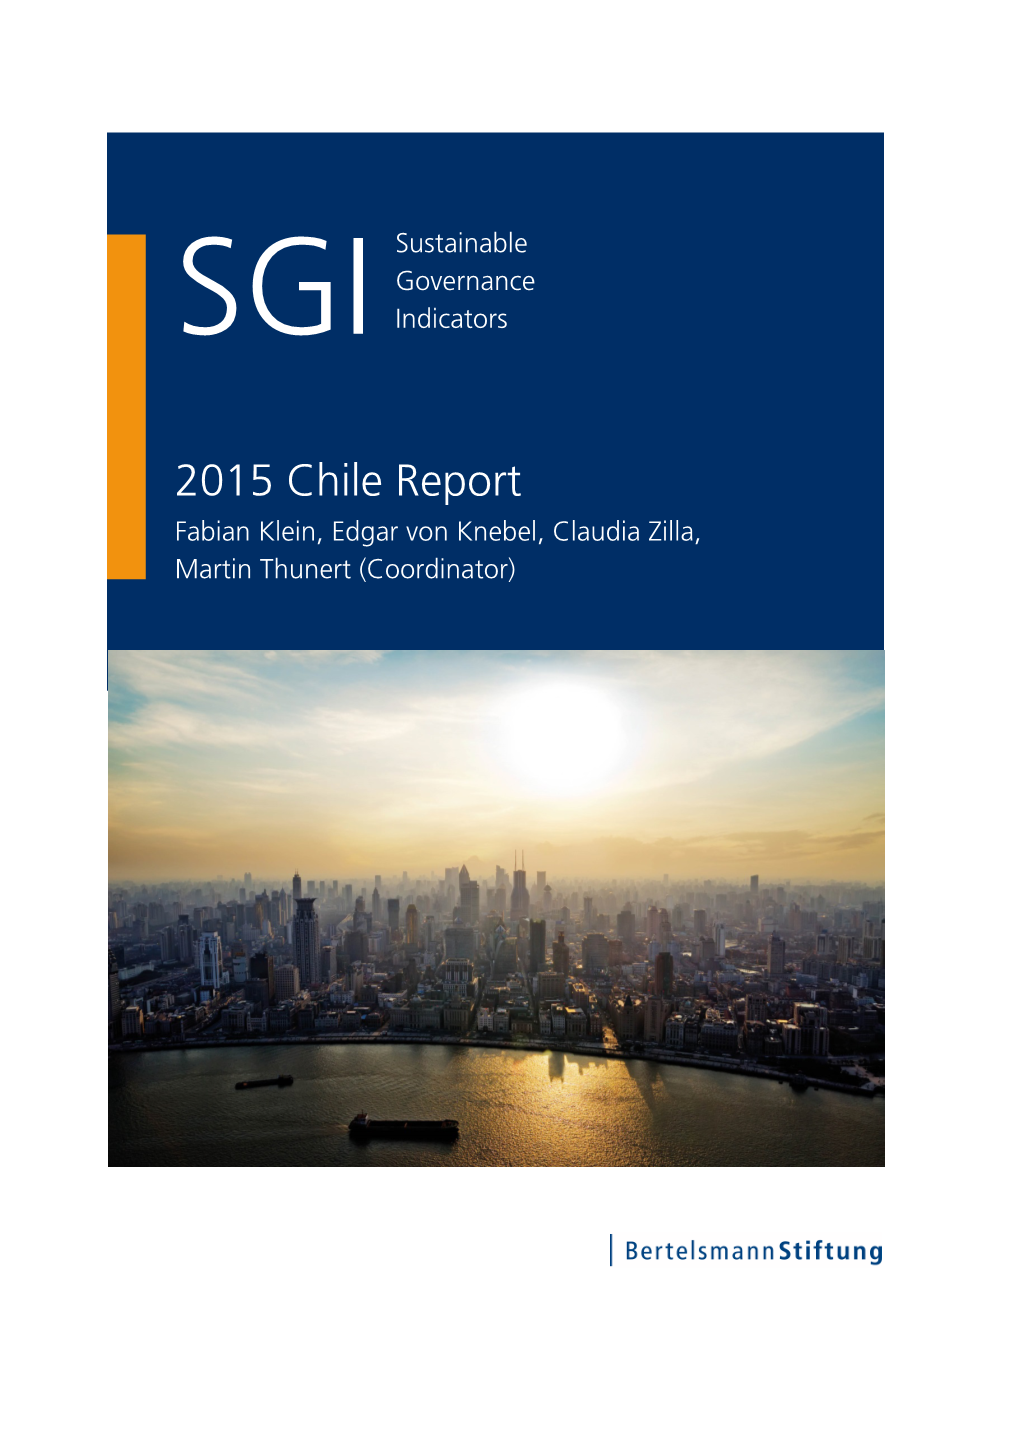 2015 Chile Country Report | SGI Sustainable Governance Indicators